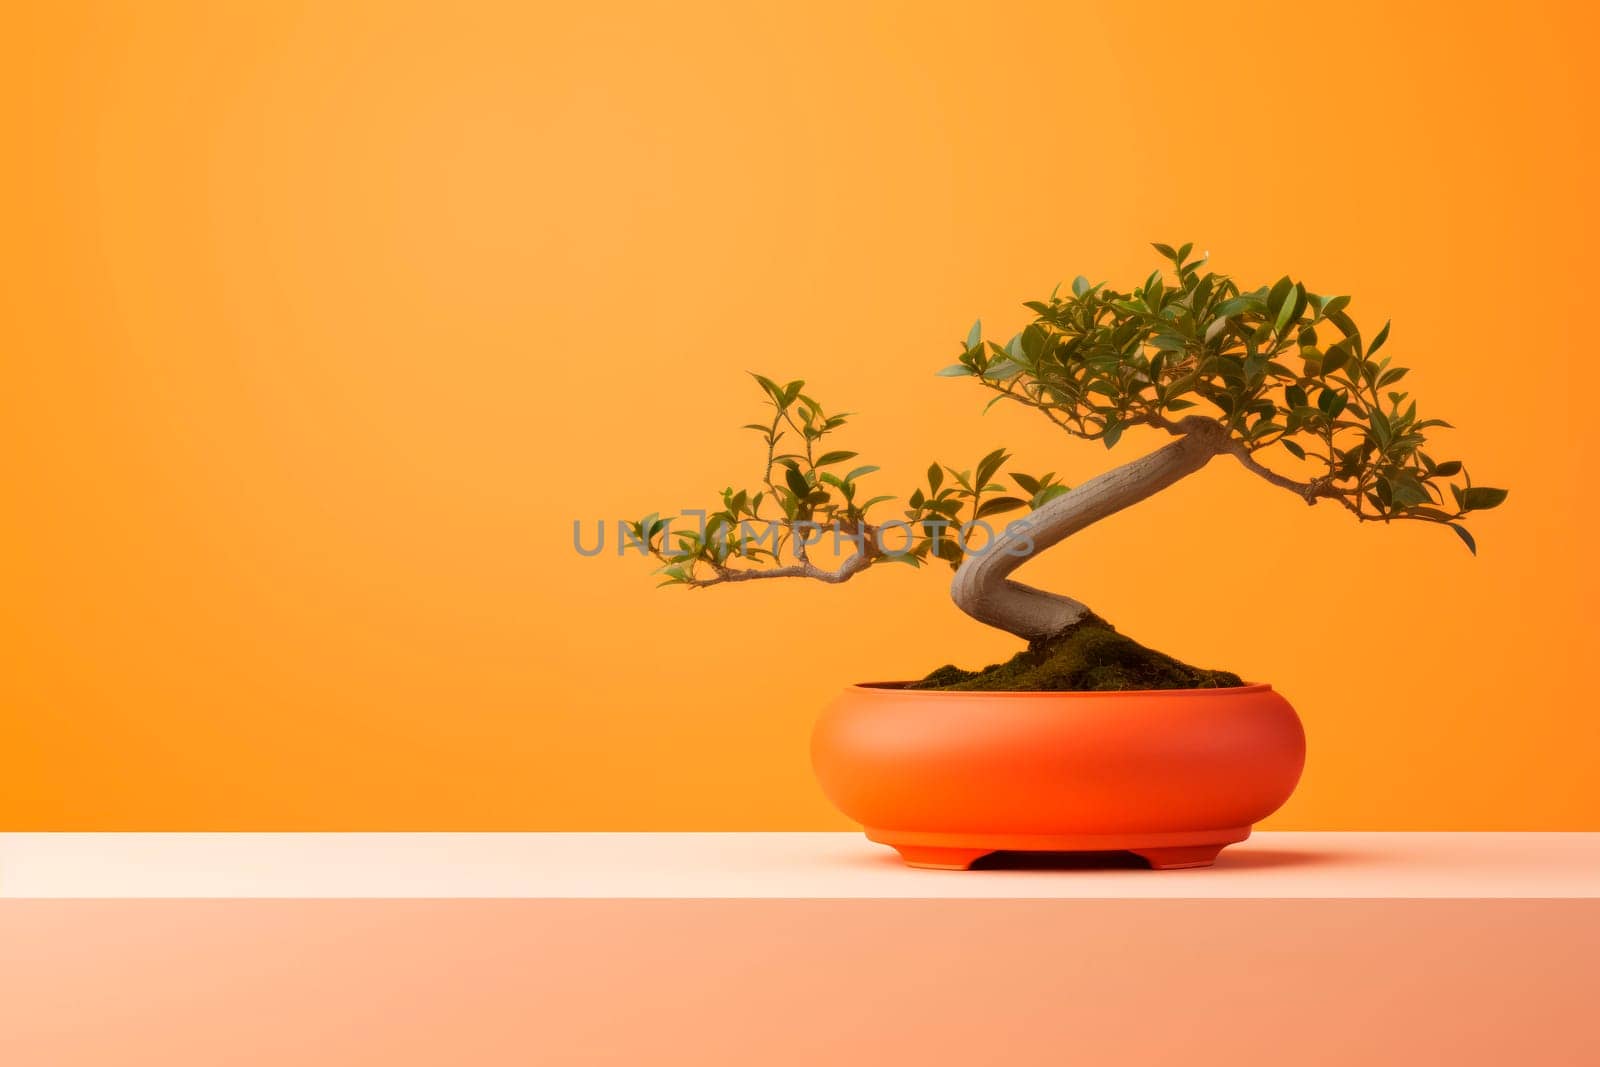 Miniature bonsai tree in a ceramic pot on a background with a copy space. Minimalism.